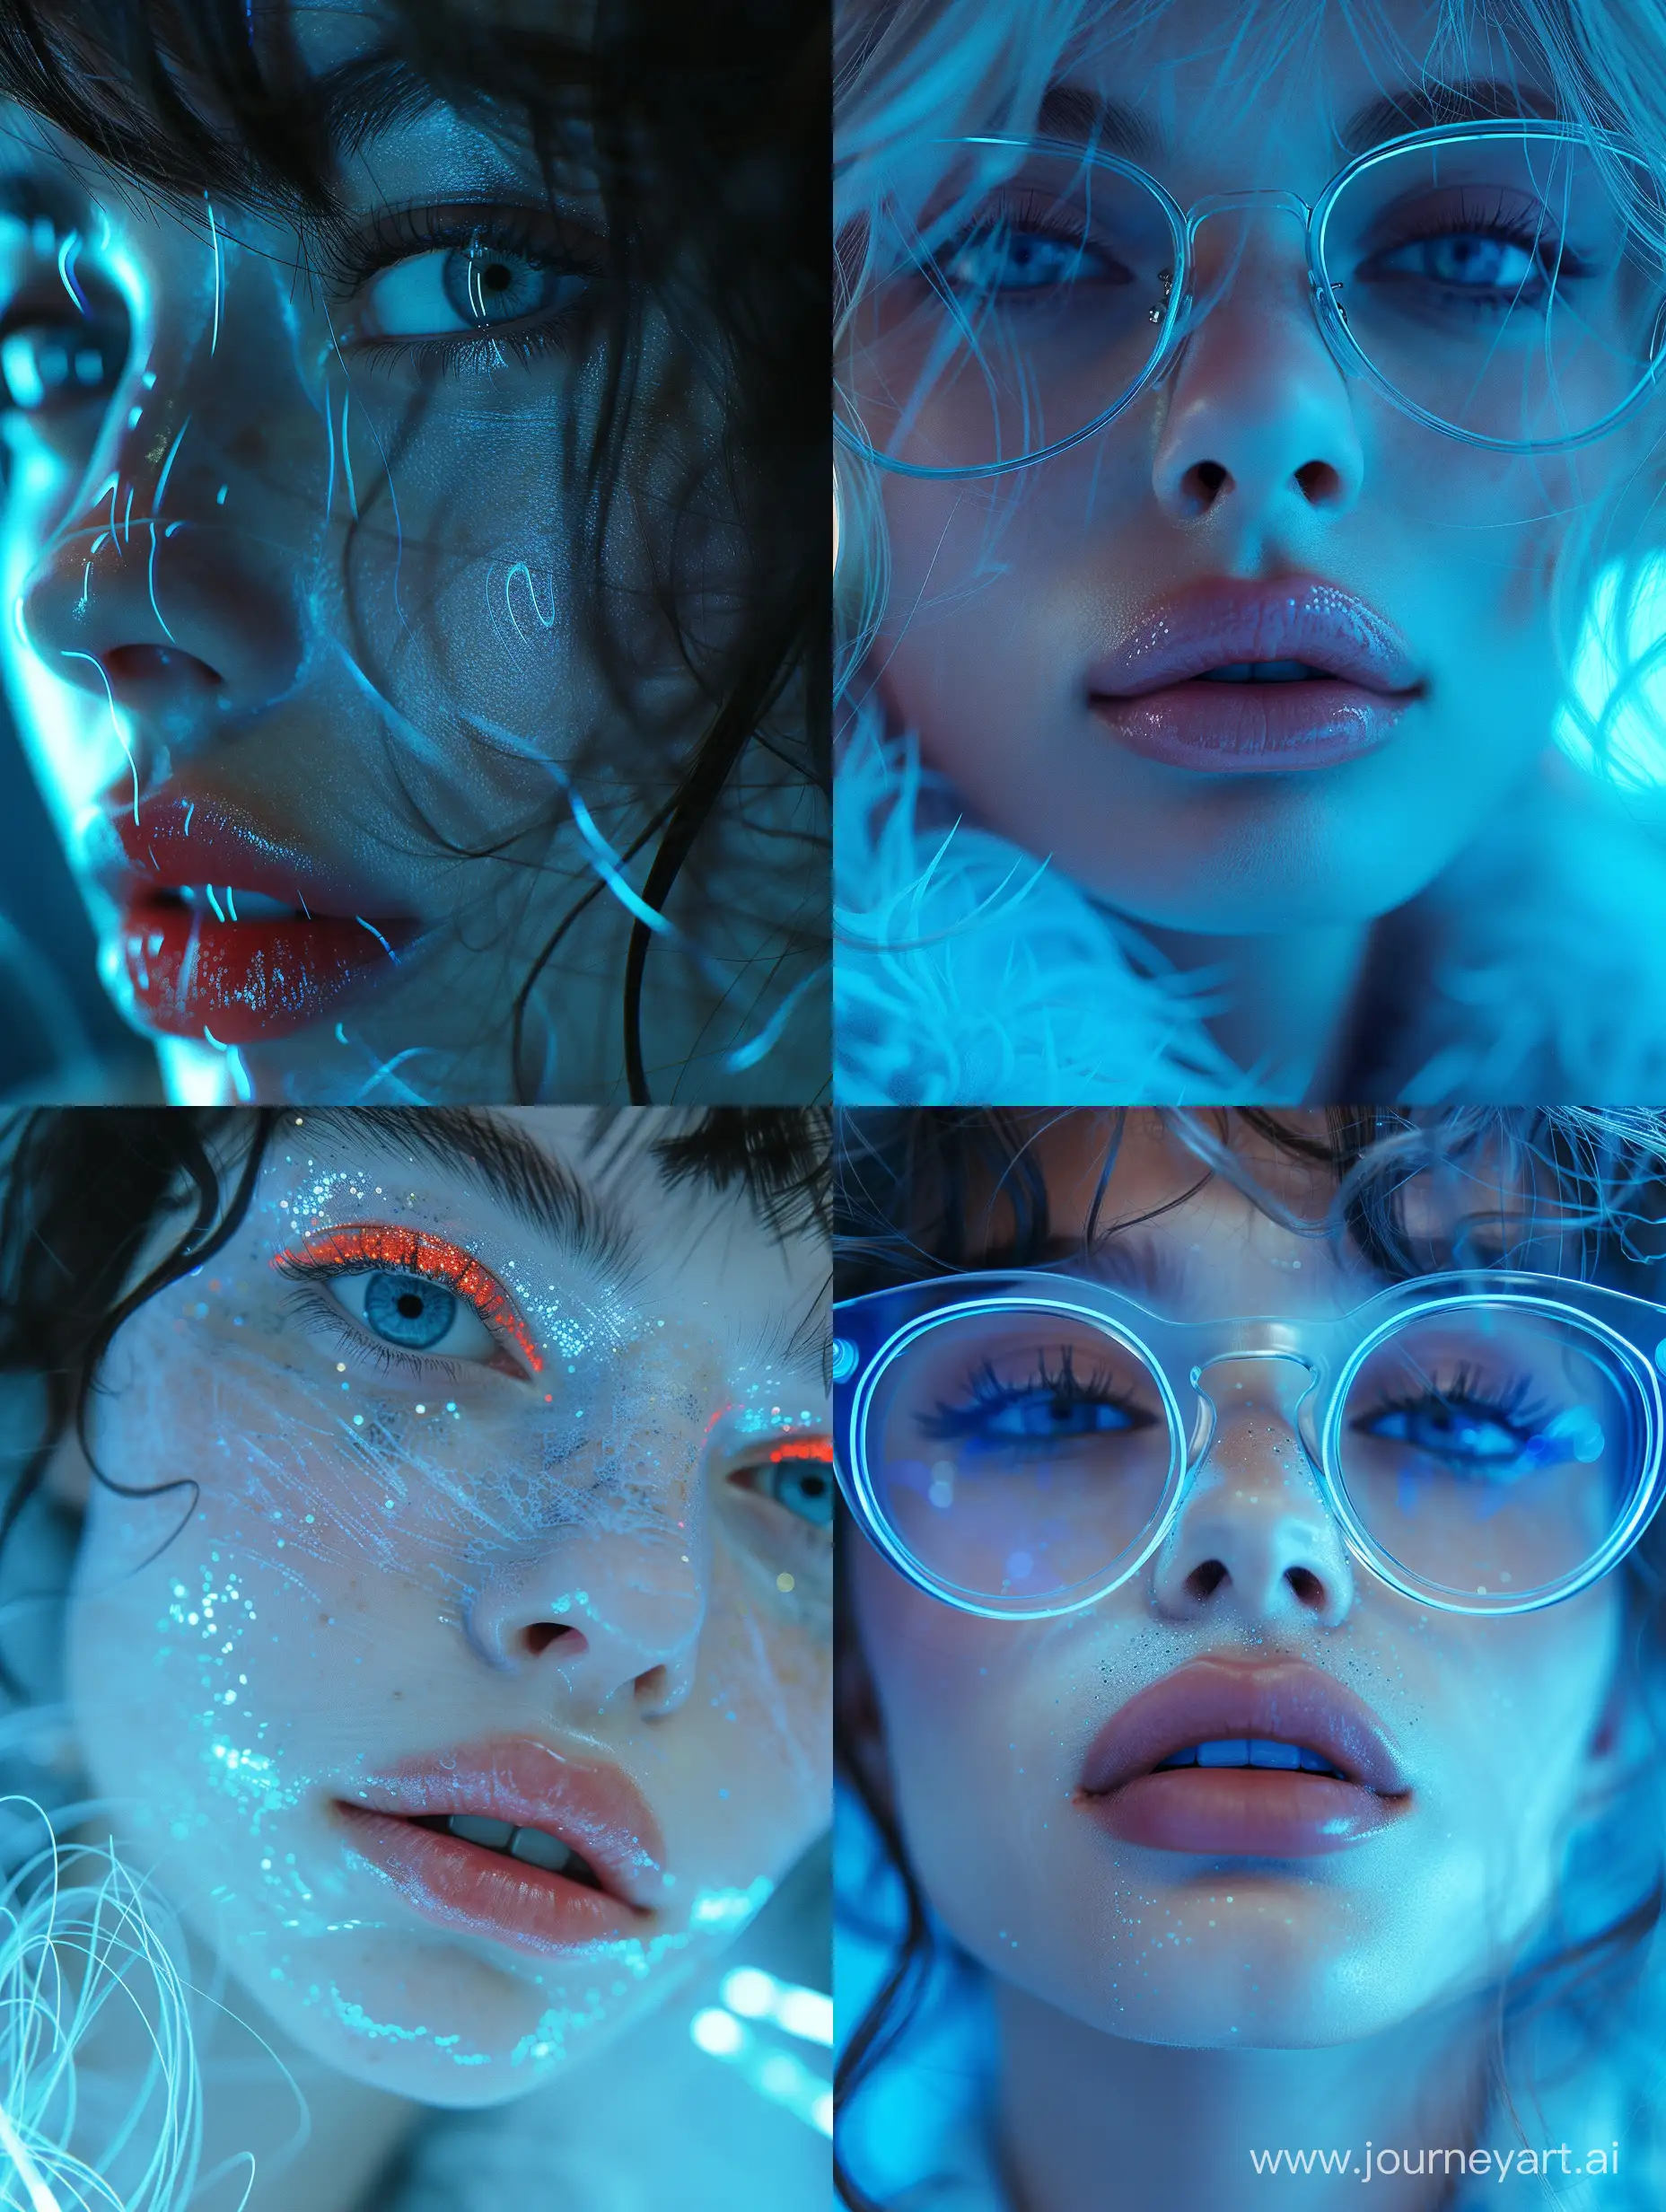 Fantastical-CloseUp-Fashion-Shoot-with-Dramatic-Blue-Light-and-Neon-Effects